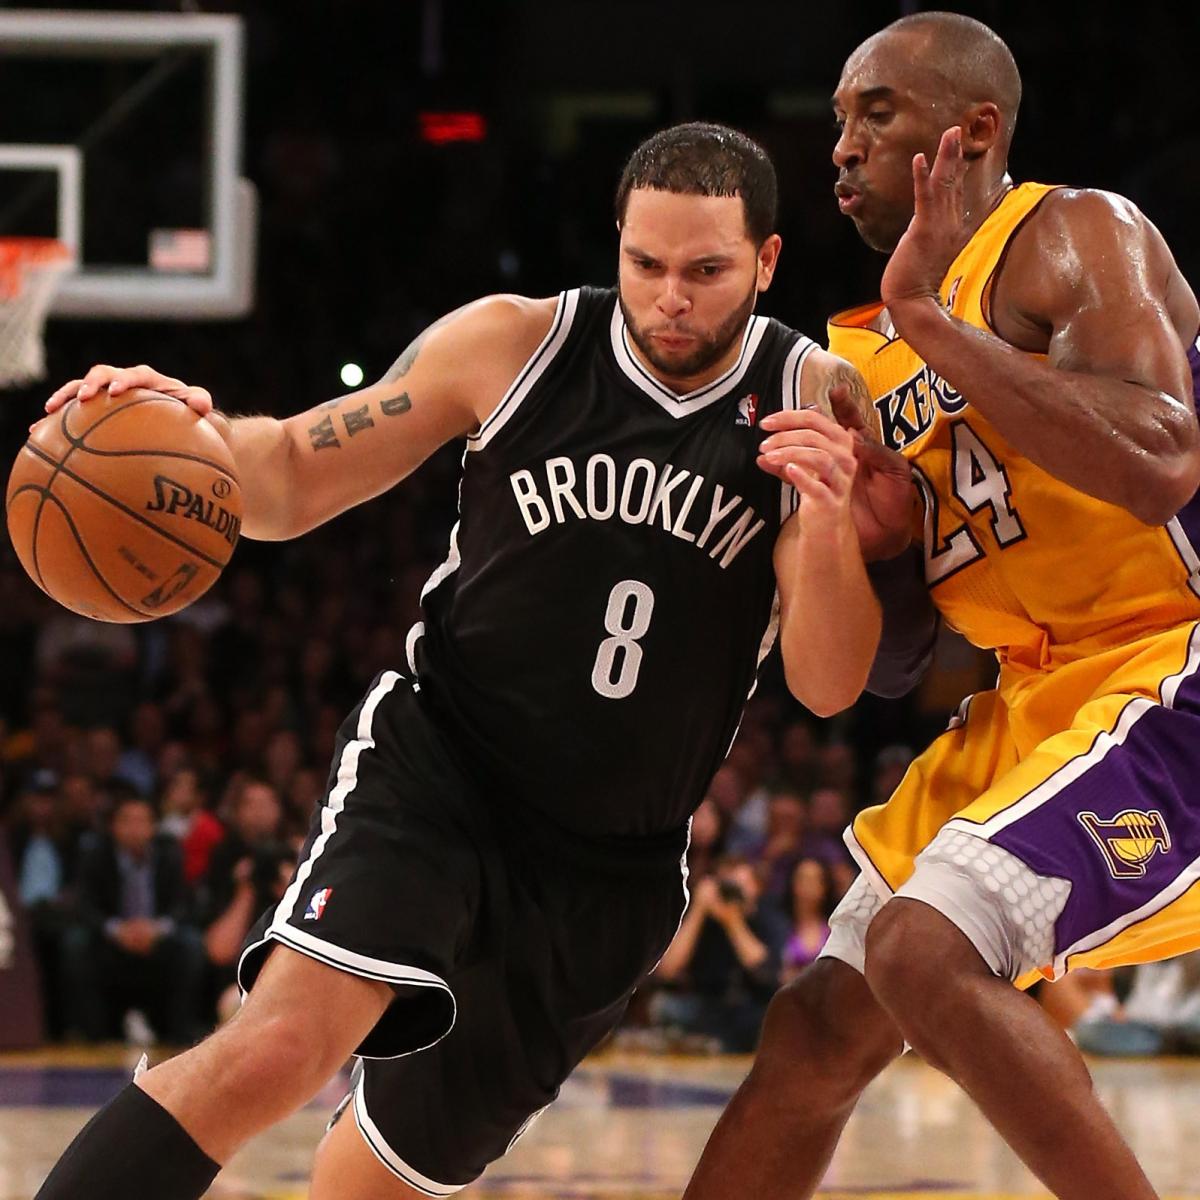 Lakers vs. Nets: Play-by-play, highlights and reactions